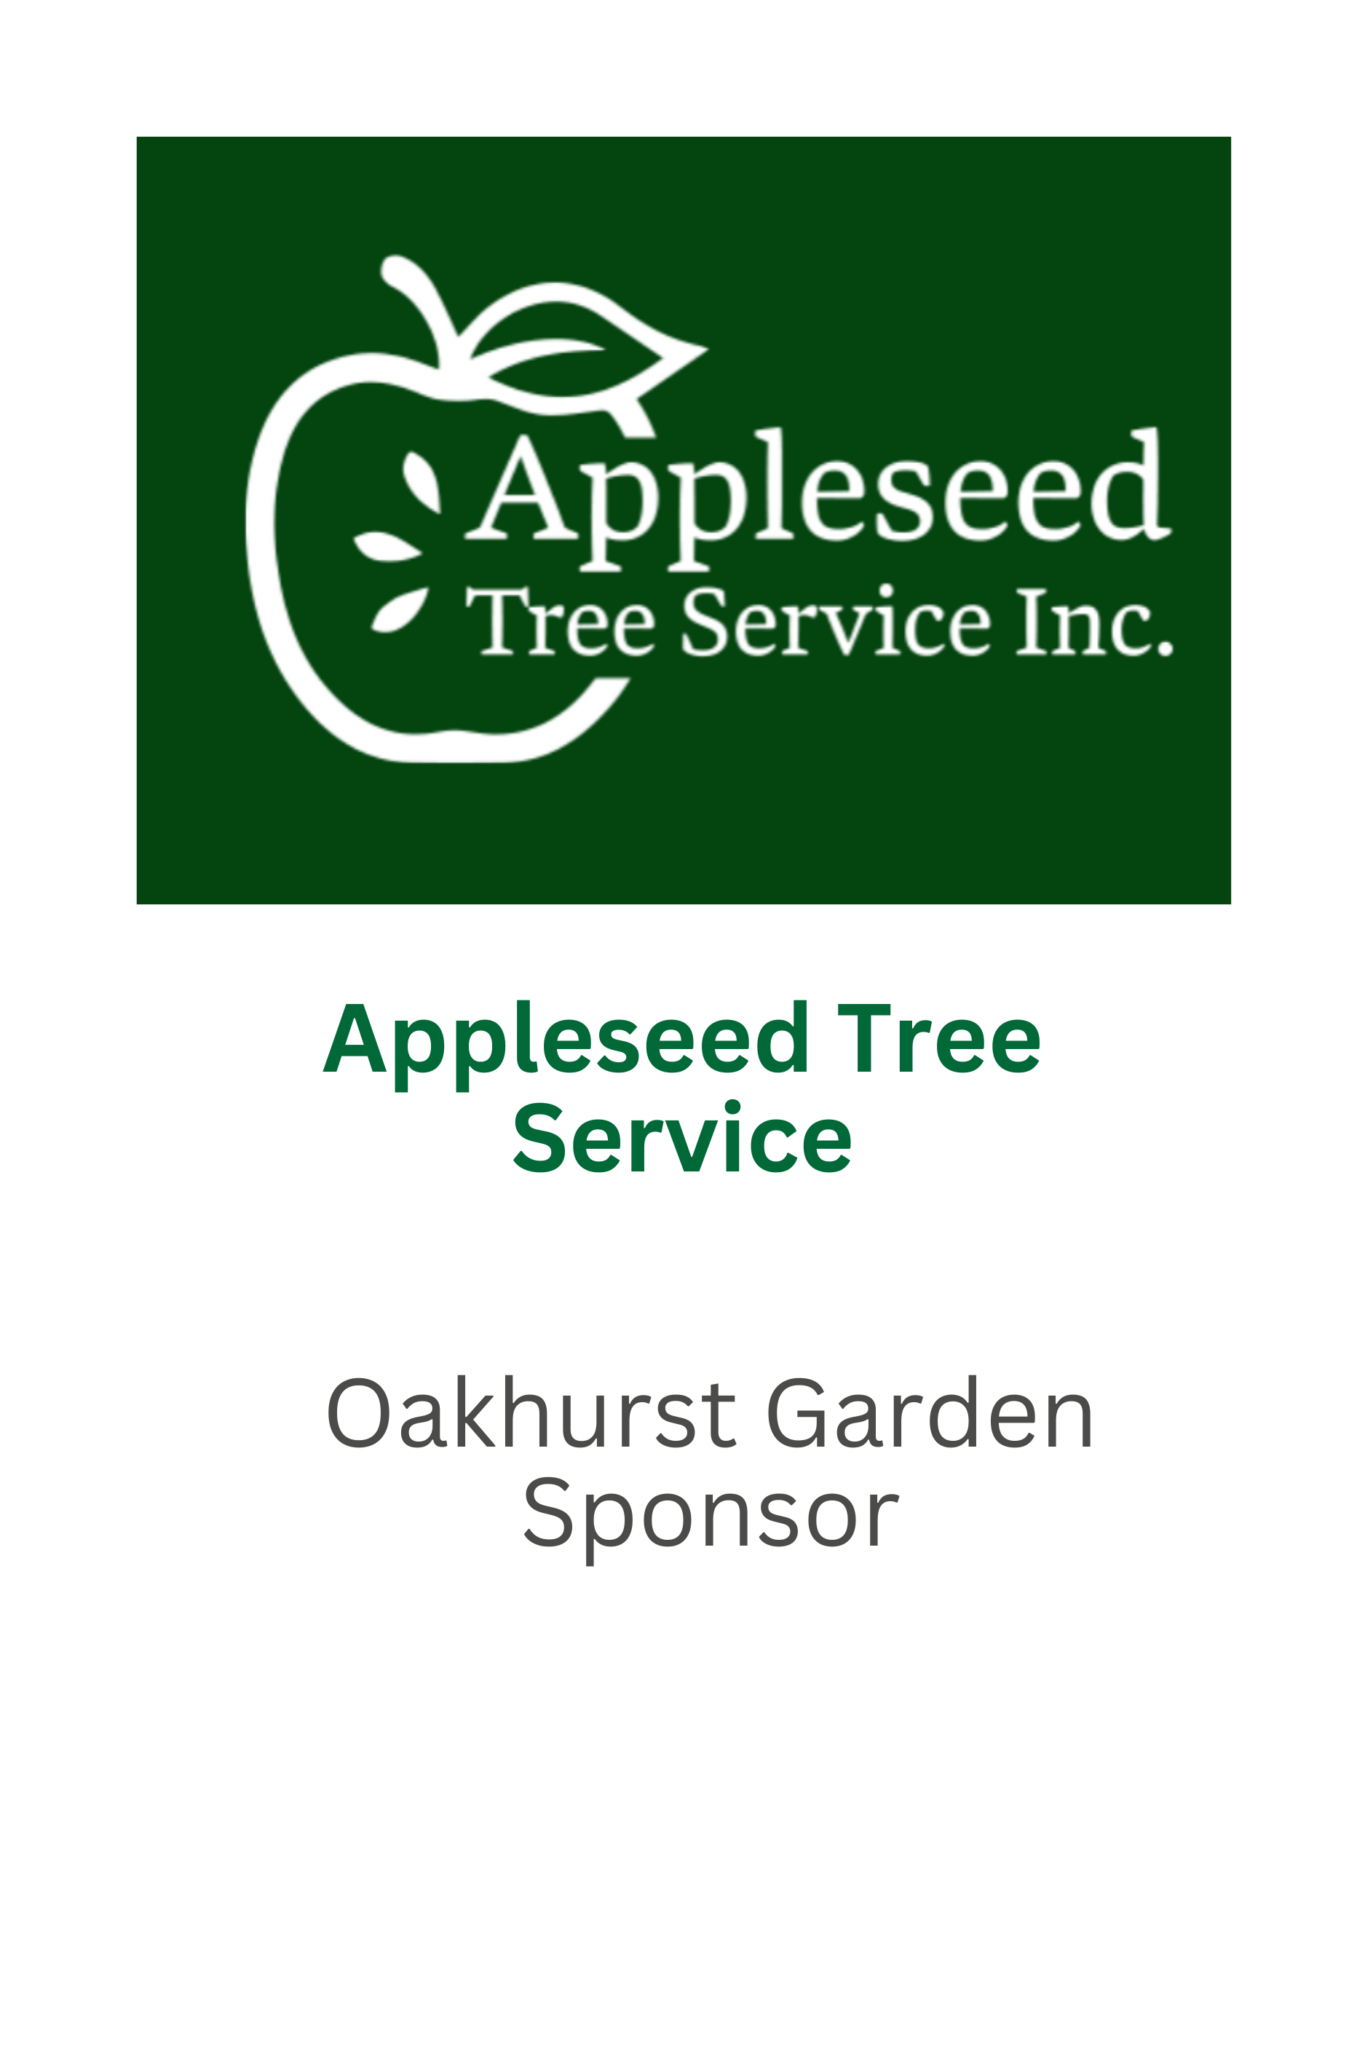 Appleseed Tree Service (2 x 3 in) (1)